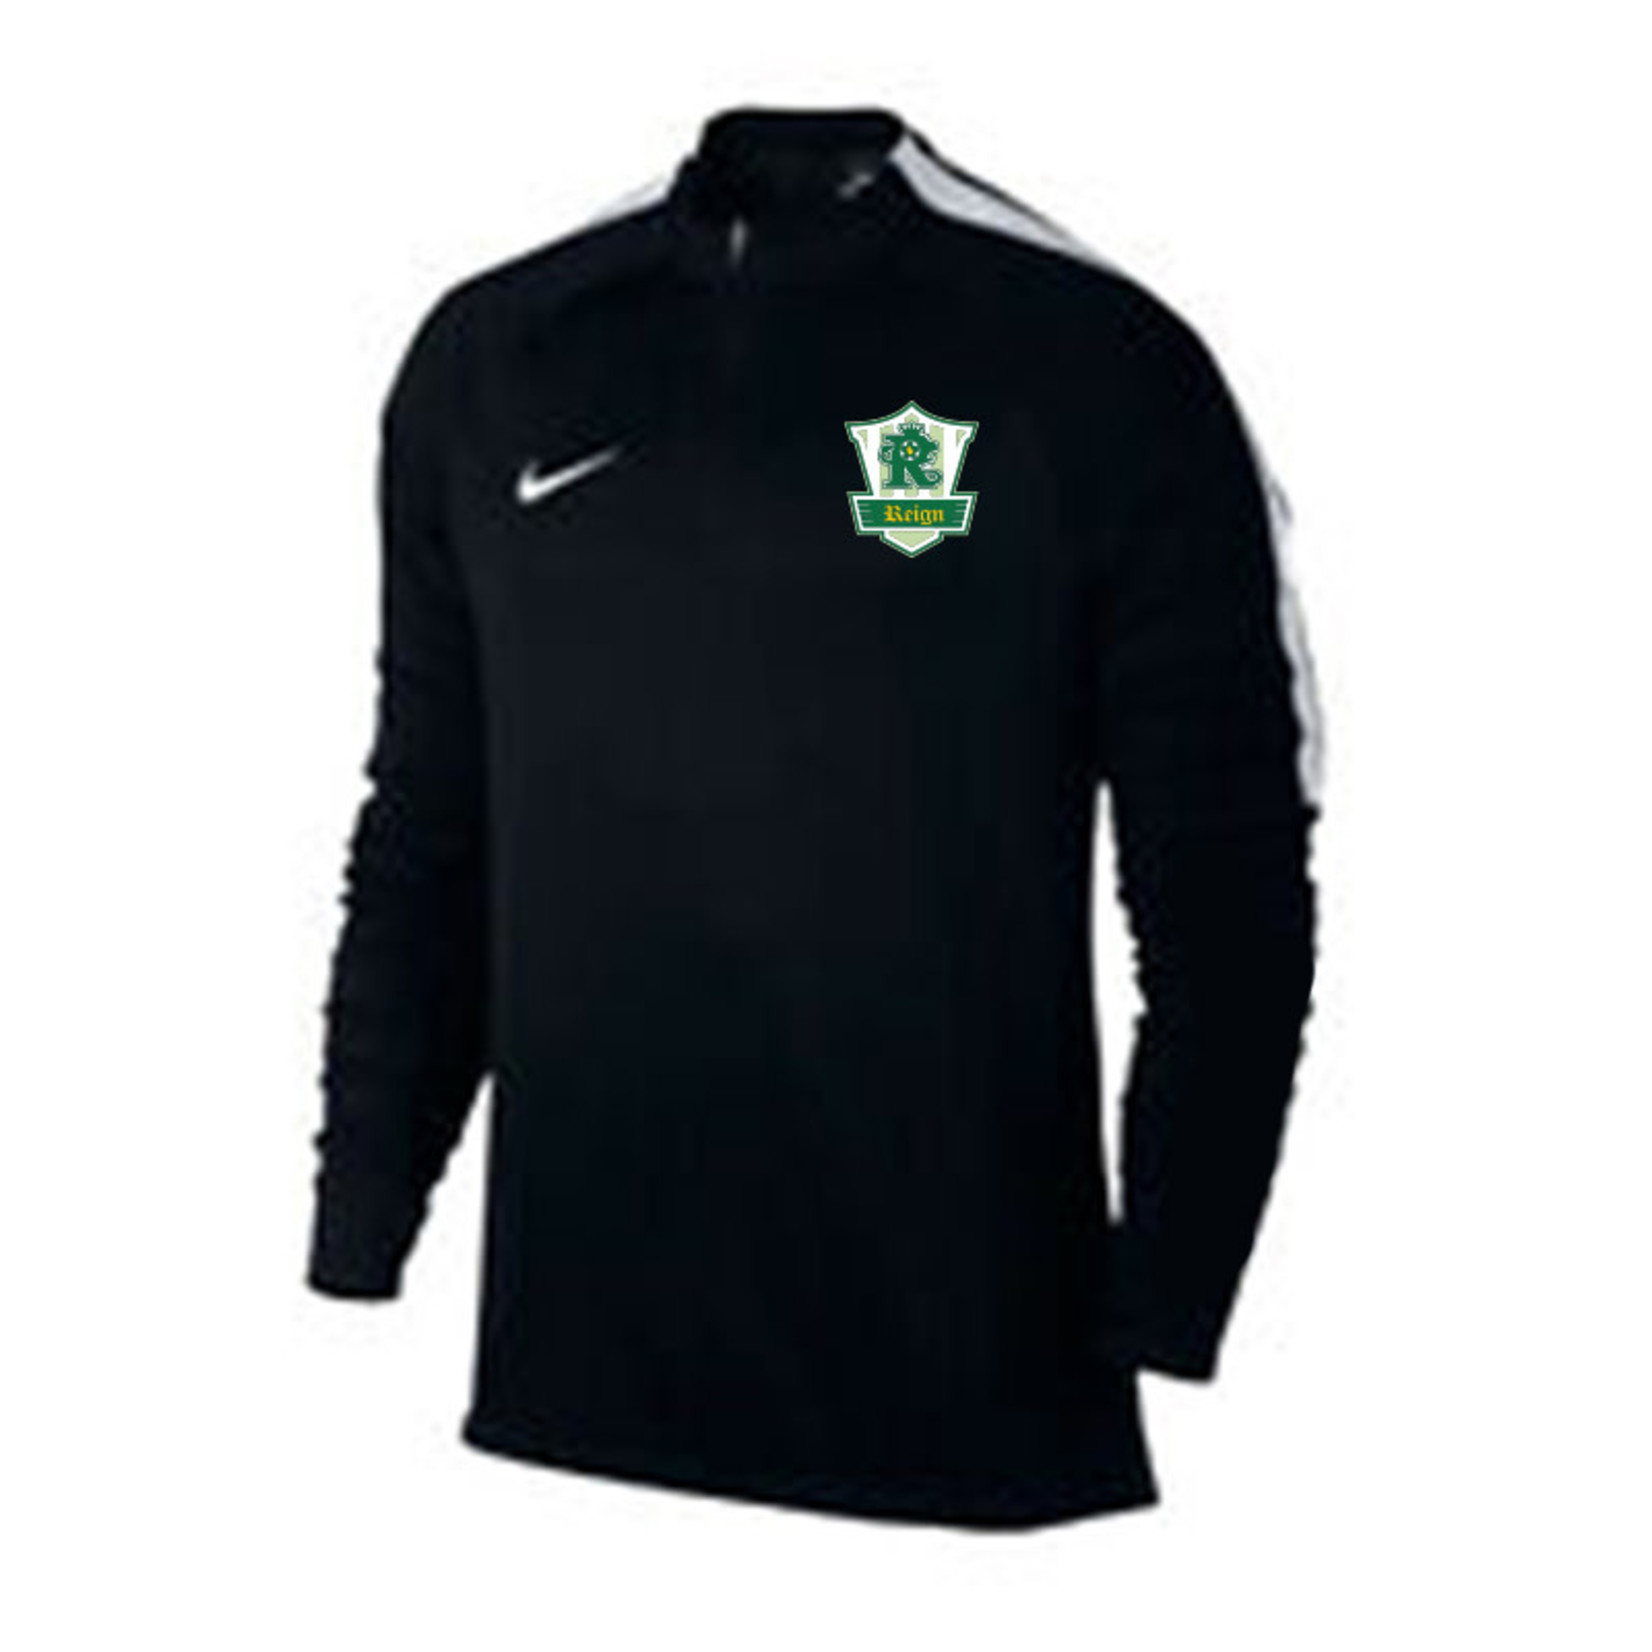 NIKE PLYMOUTH REIGN SQUAD 16 1/4 ZIP YOUTH (BLACK)